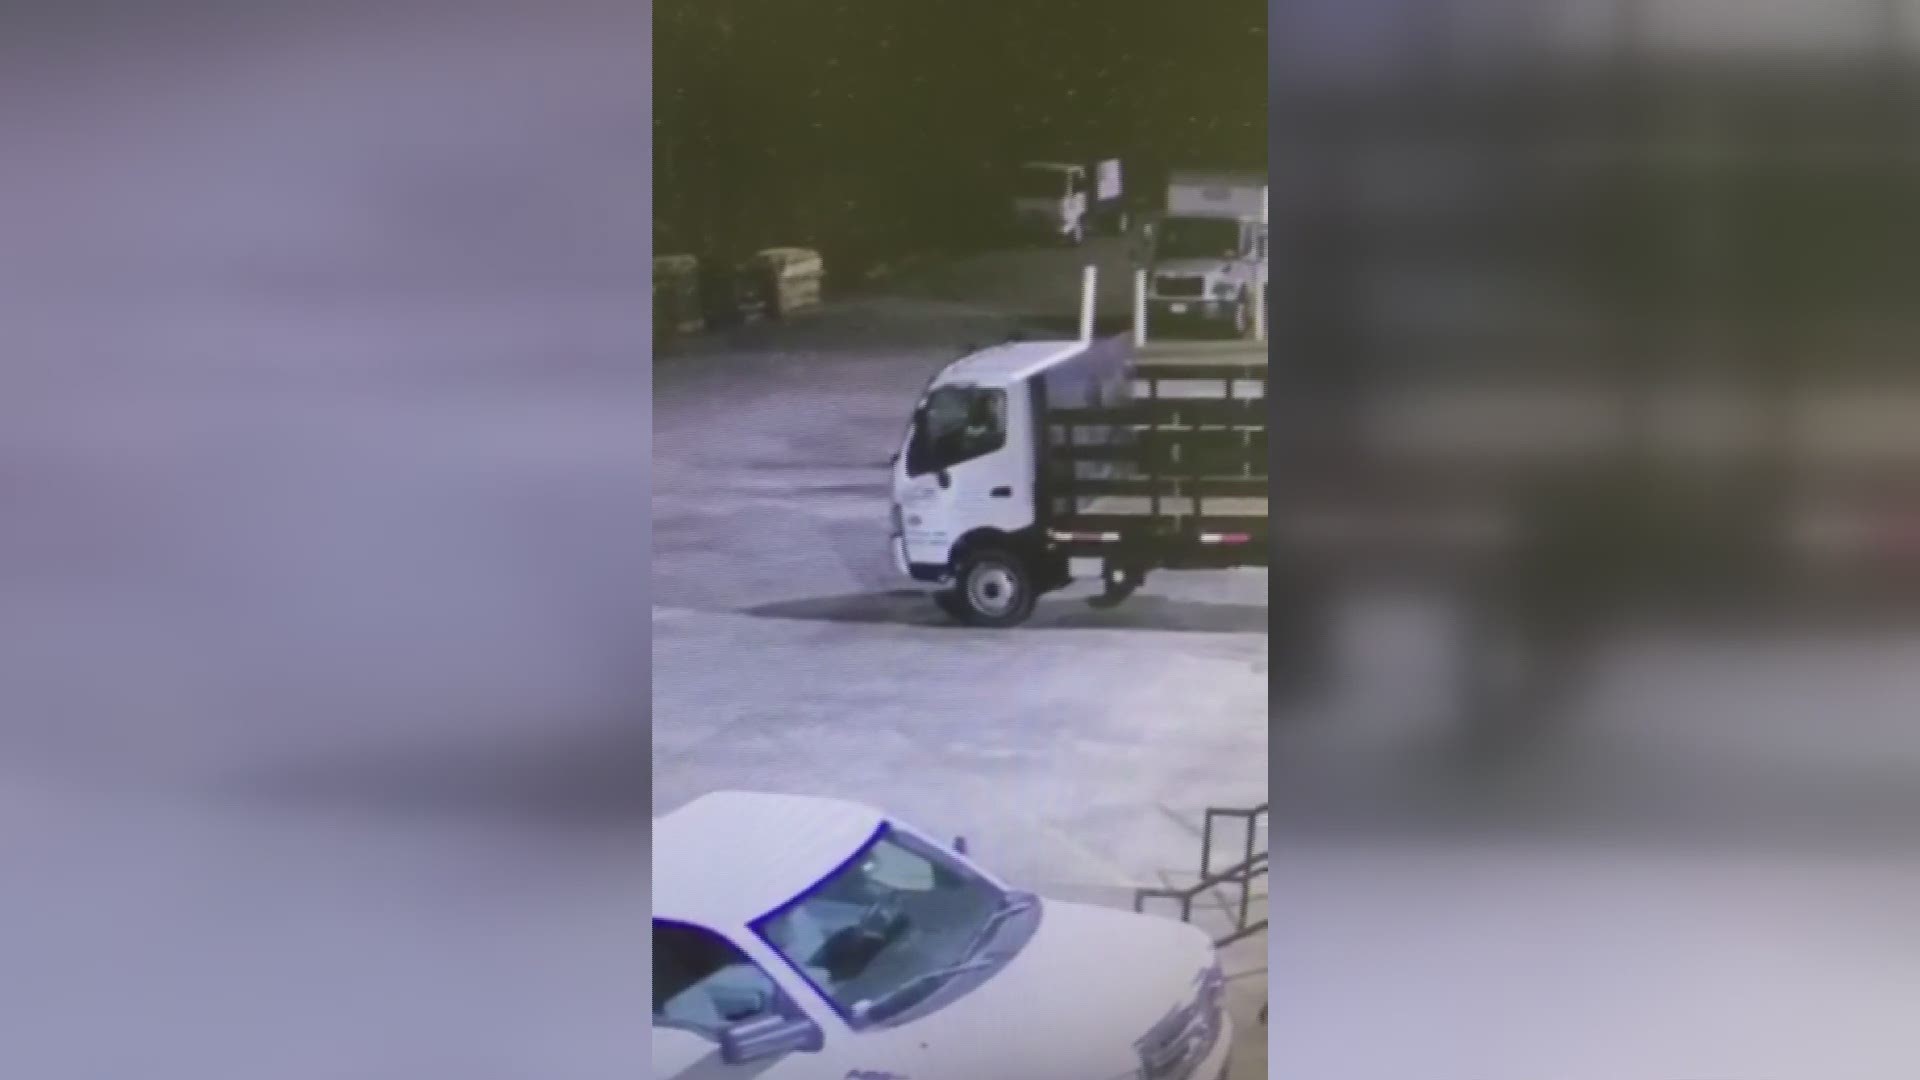 In a video released by the sheriff's office, the three wanted people are seen walking around some vehicles.